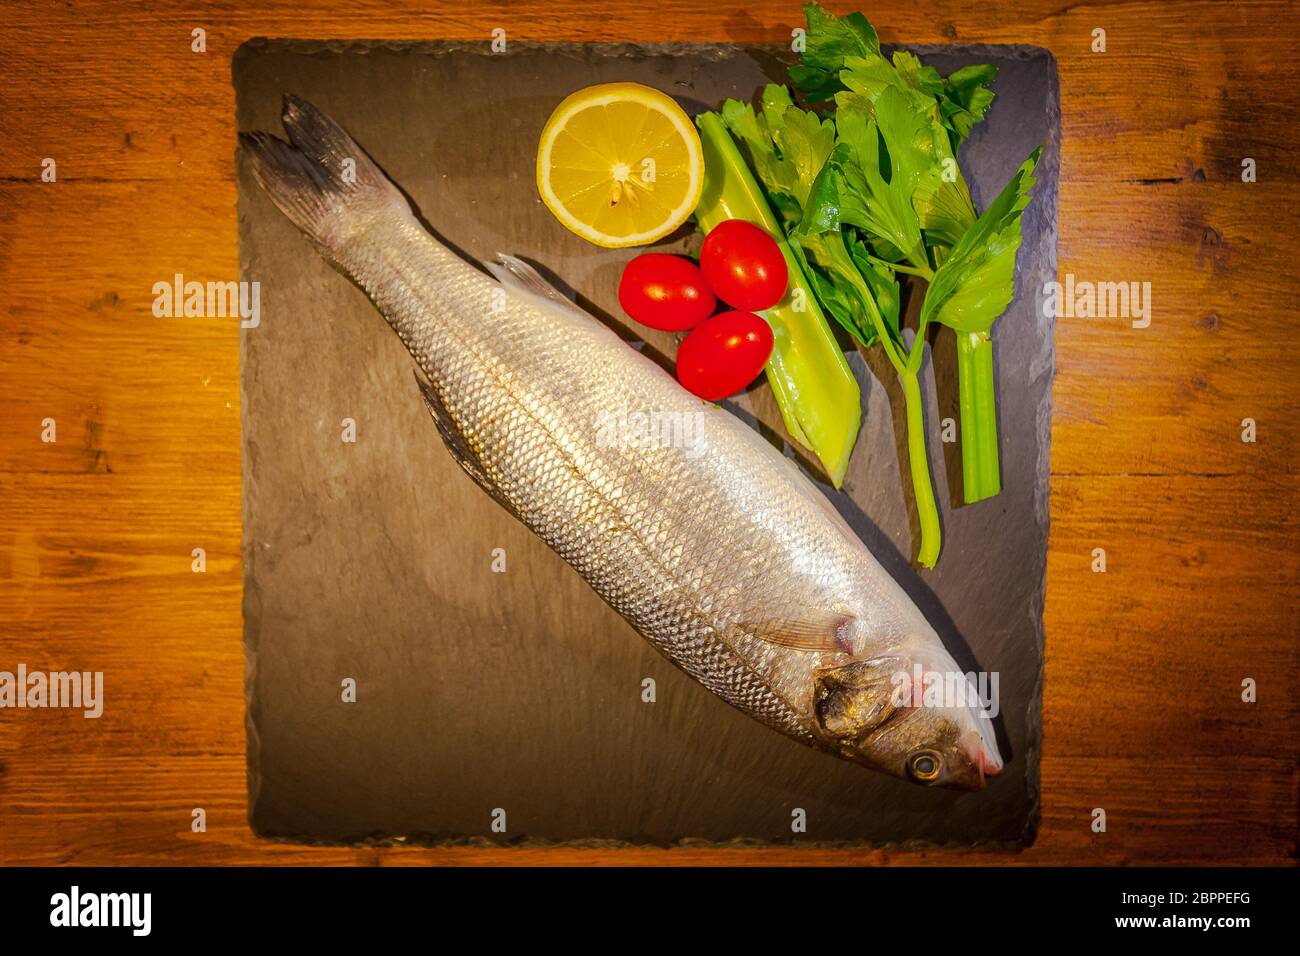 Slate dish with sea bass, lemon, celery and tomatoes on wooden background Stock Photo